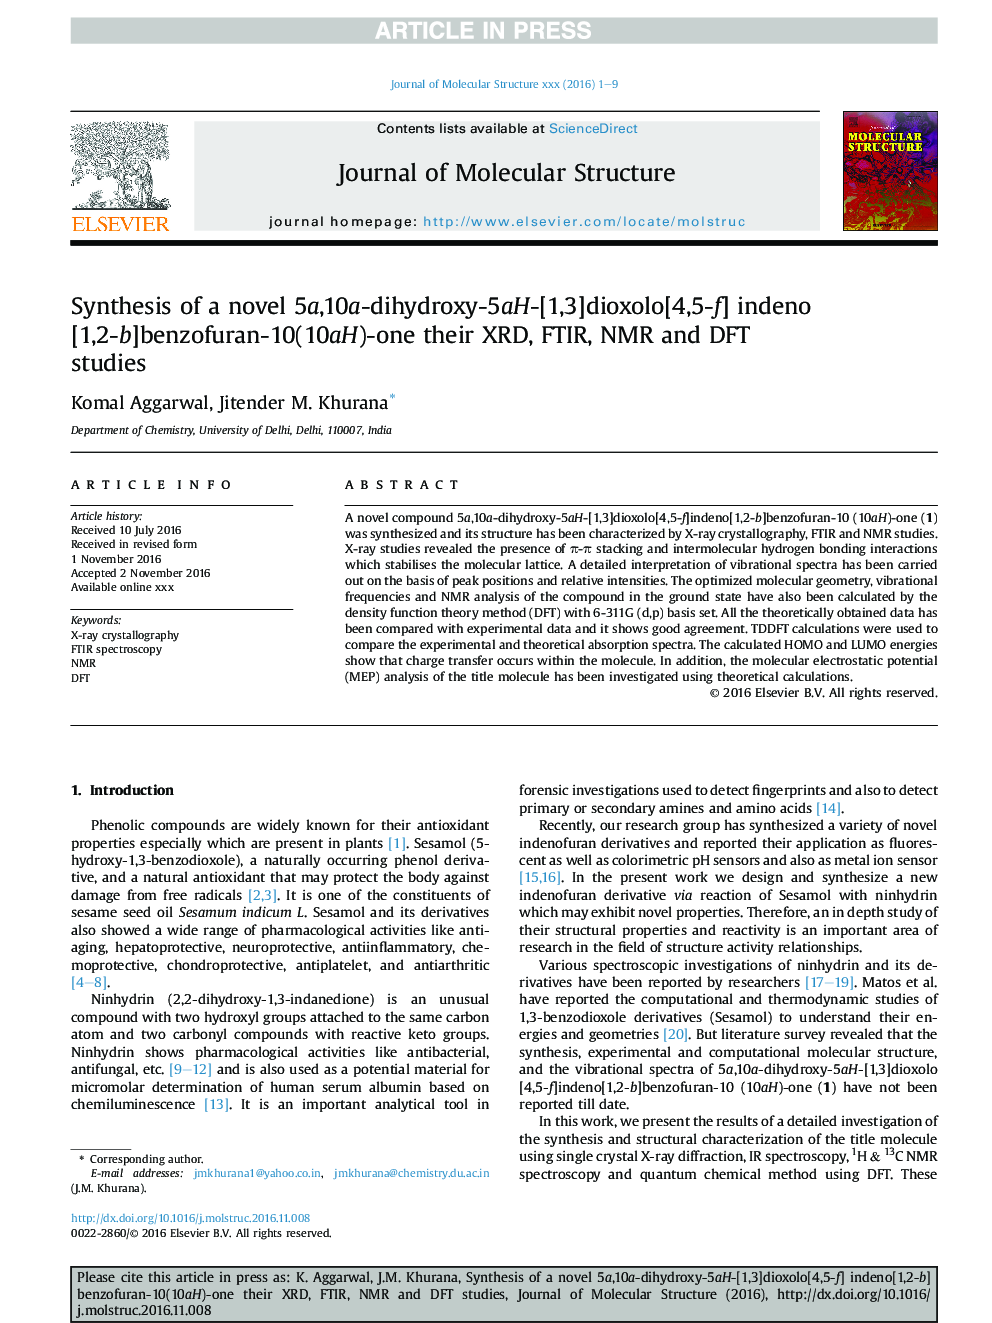 Synthesis of a novel 5a,10a-dihydroxy-5aH-[1,3]dioxolo[4,5-f] indeno[1,2-b]benzofuran-10(10aH)-one their XRD, FTIR, NMR and DFT studies